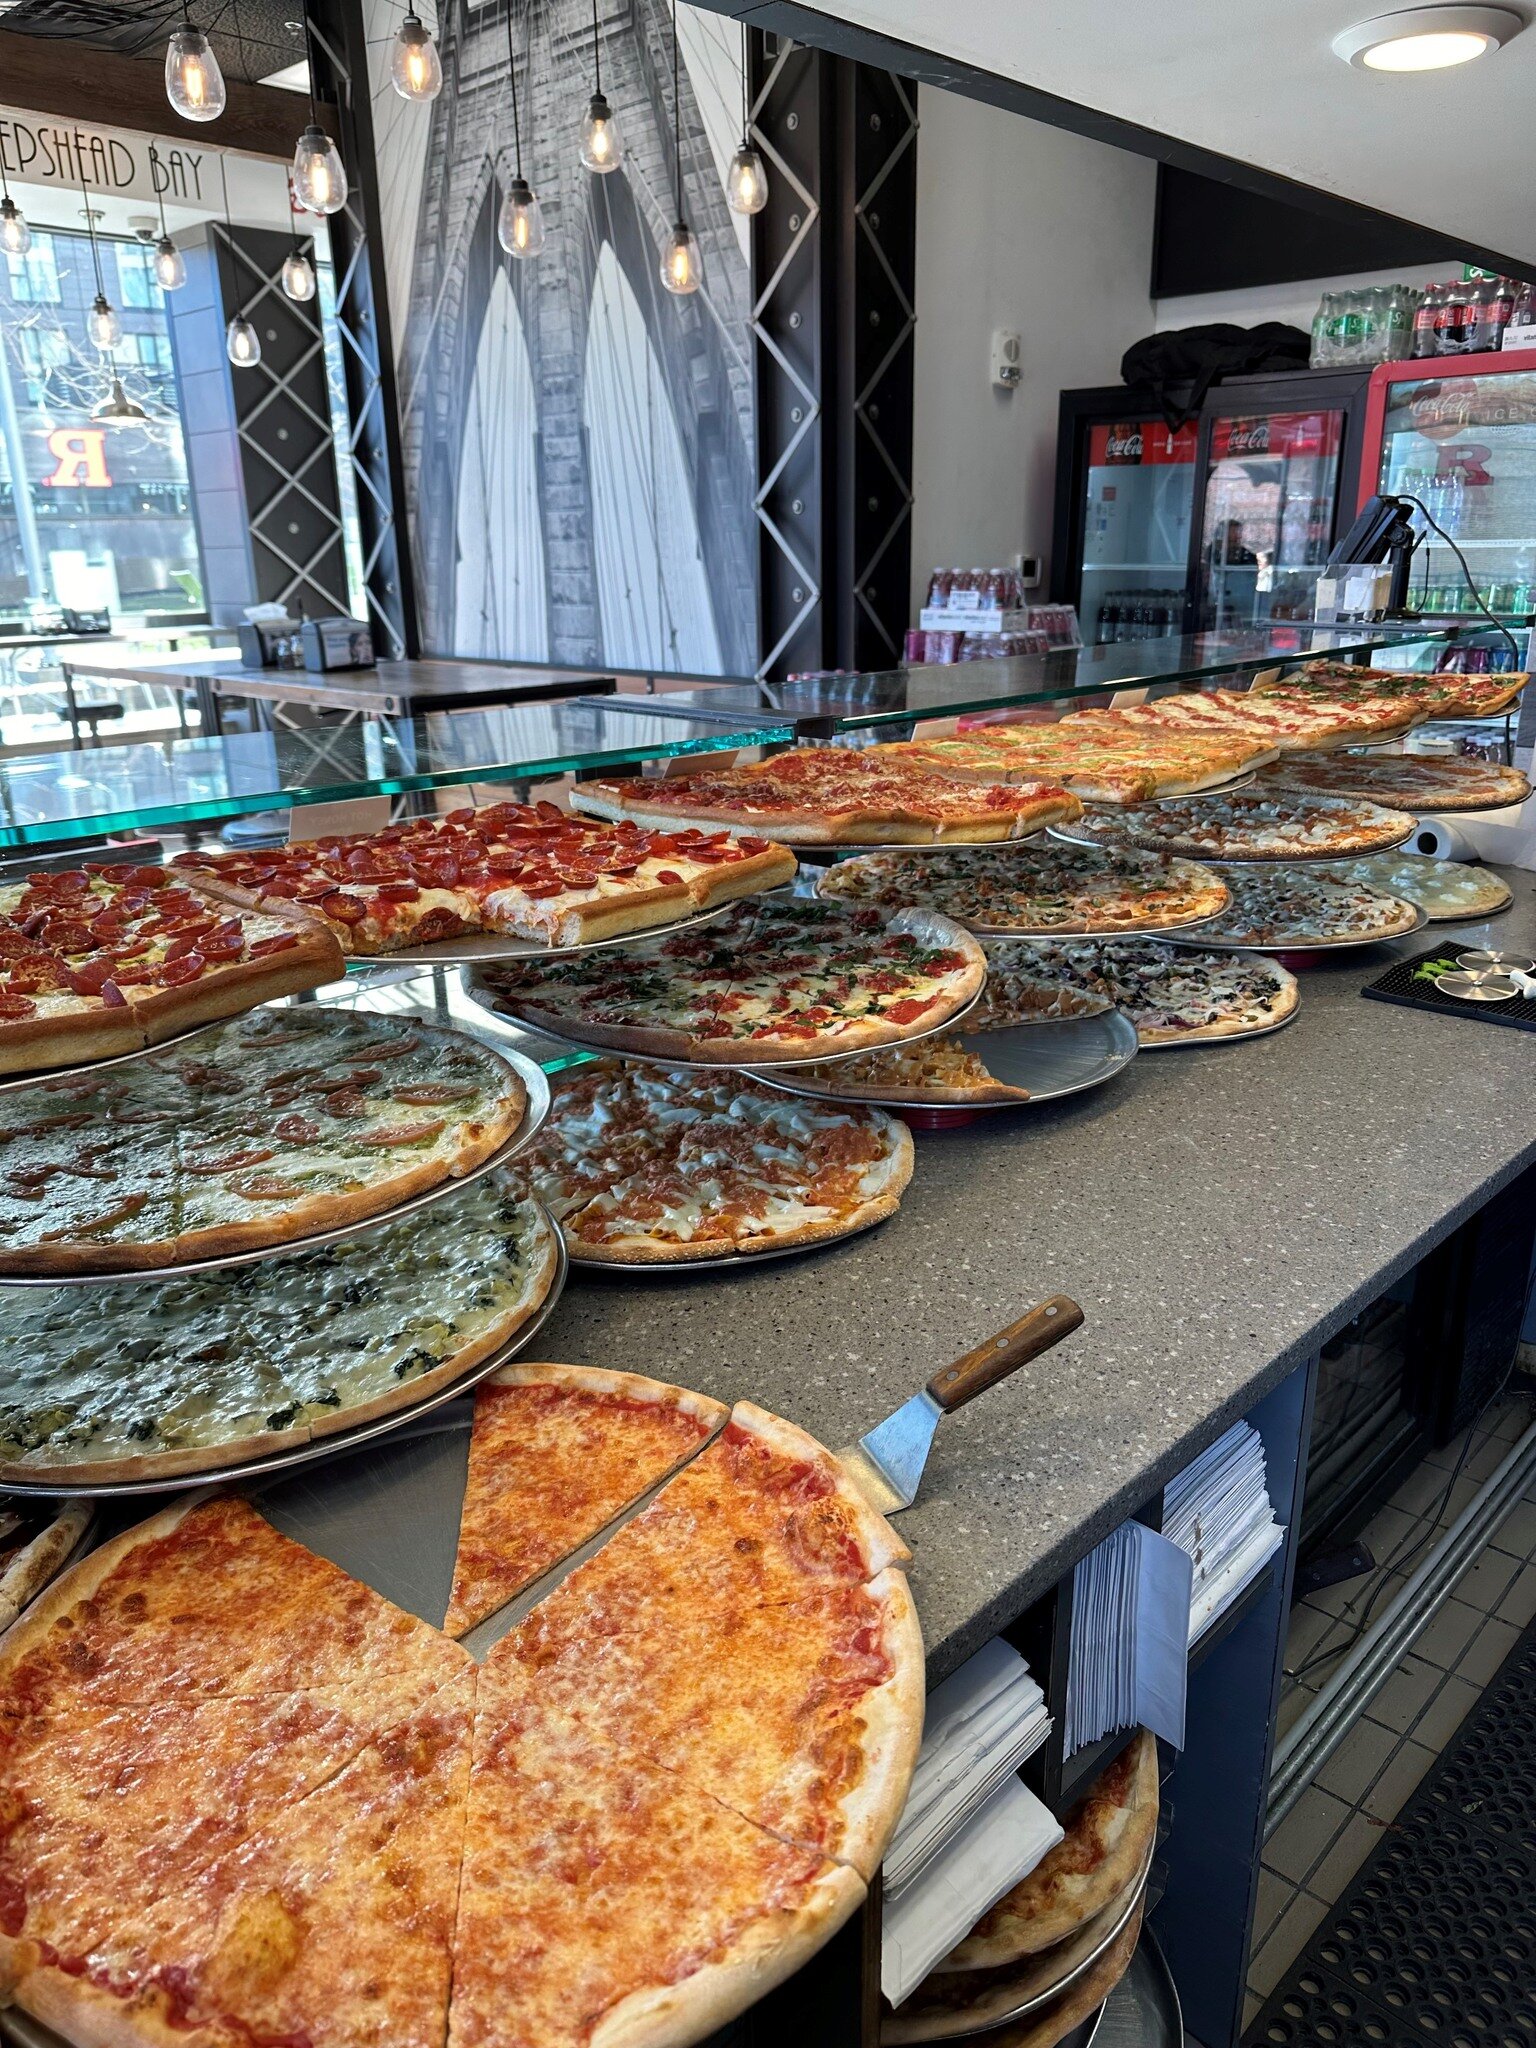 Celebrate #nationalpizzaday at @rukrispy today! What's your favorite topping?🍕
.
.
.
#theyard #theyardru #theyardrutgers #theyardatcollegeave #collegeave #newbrunswick #newbrunswicknj #ru #rutgers #rutgersu #rutgersuniversity #rutgersnb #rutgersuniv